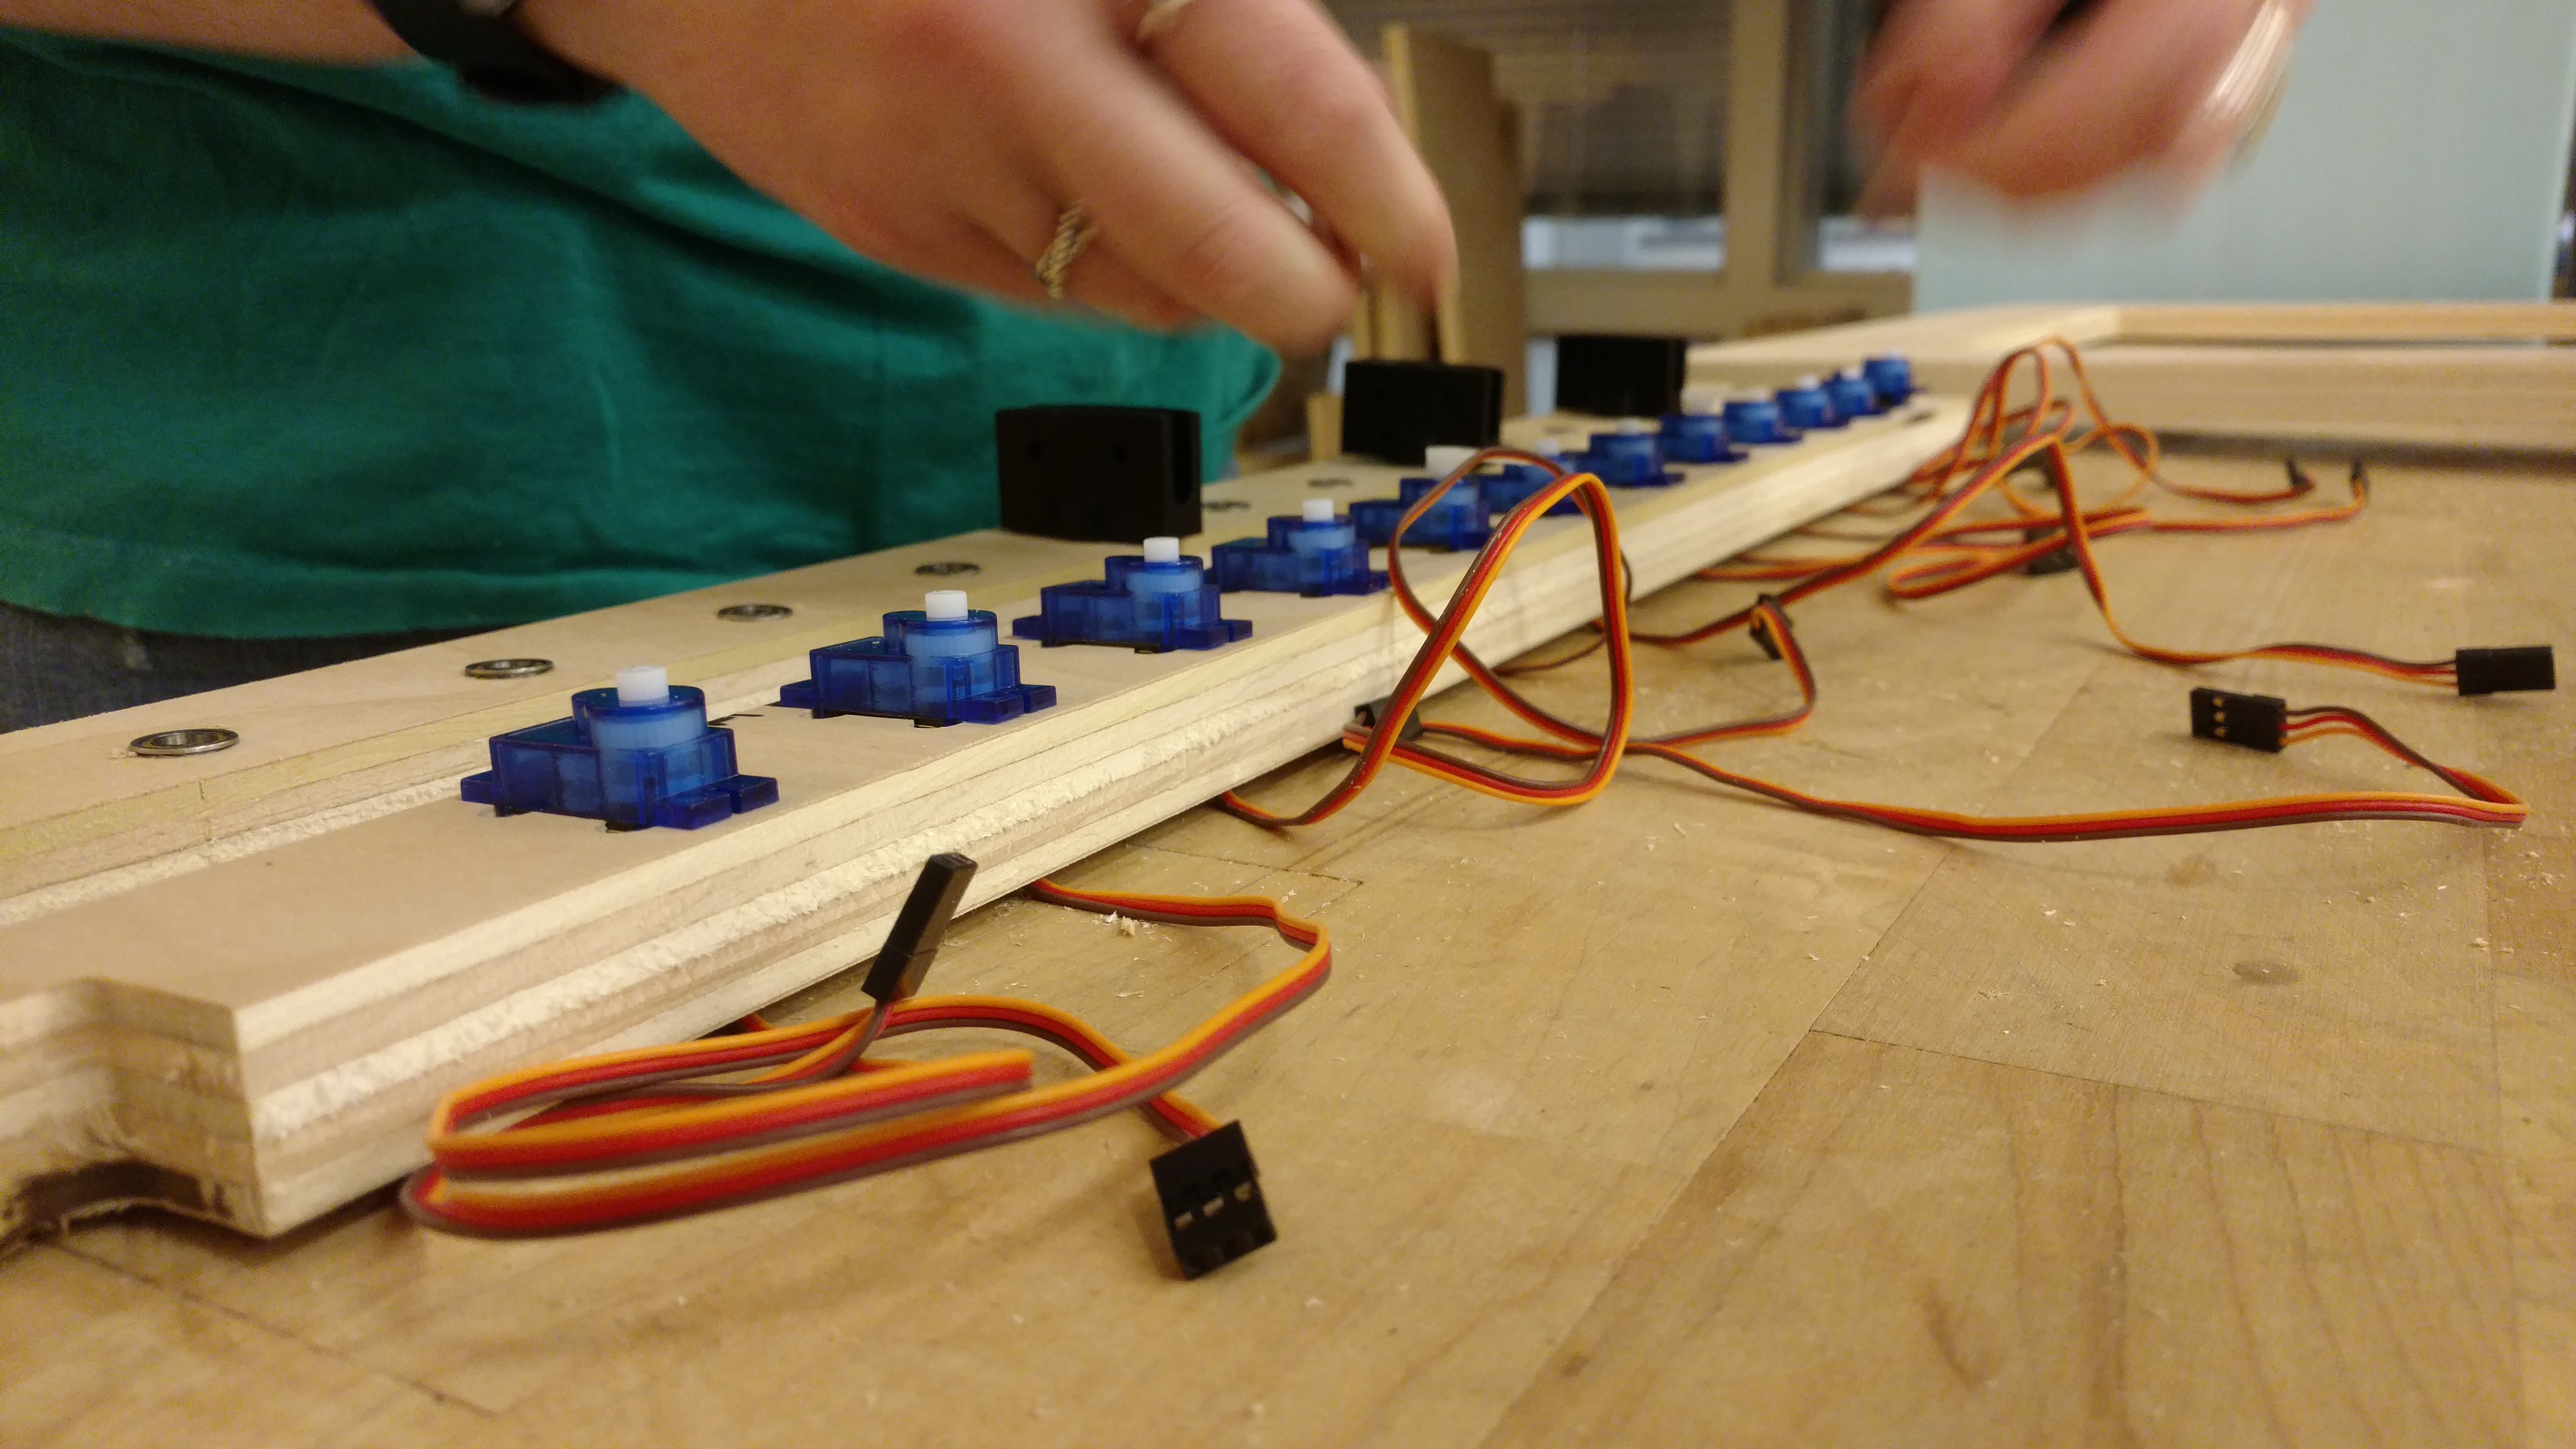 A view of our servo mounting in progress. All servos are press fit into their holes with the wires sticking out.